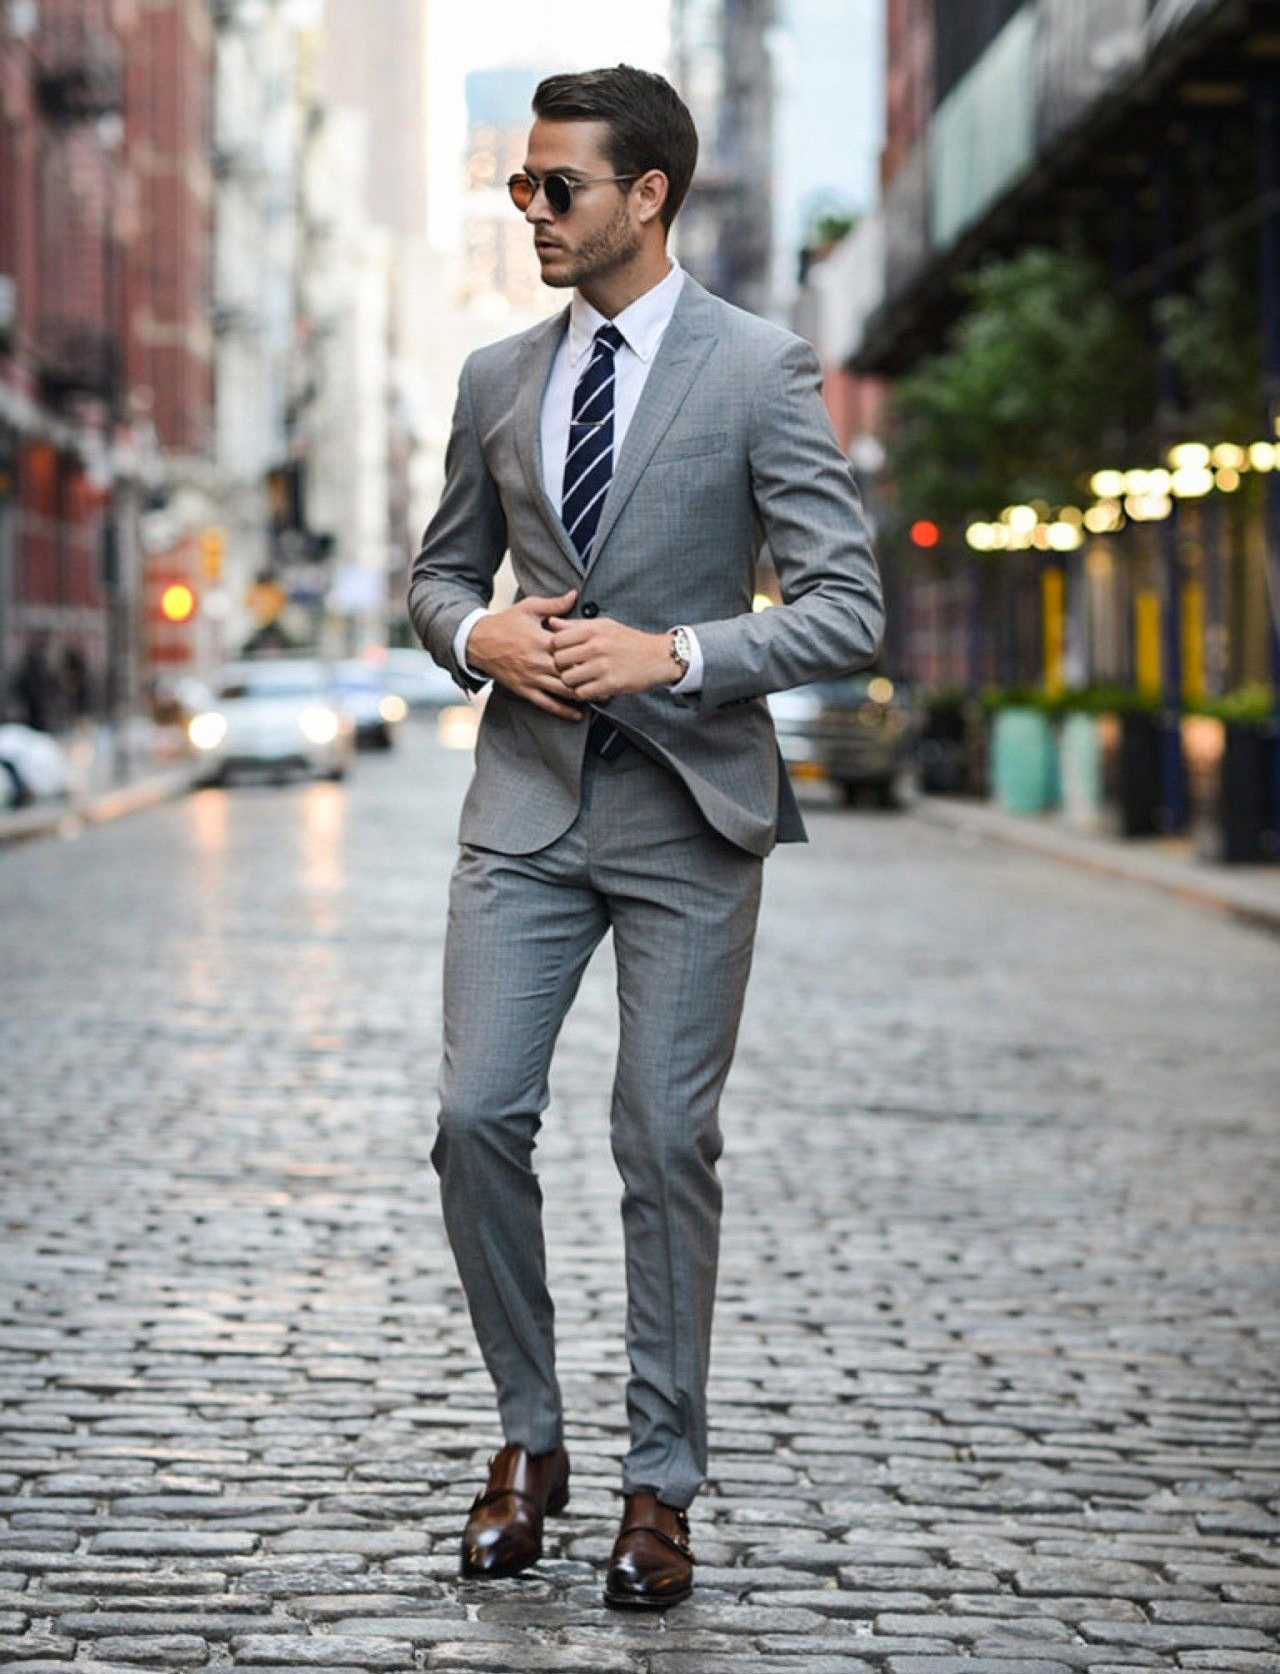 Grey suit, white dress shirt, and navy striped tie